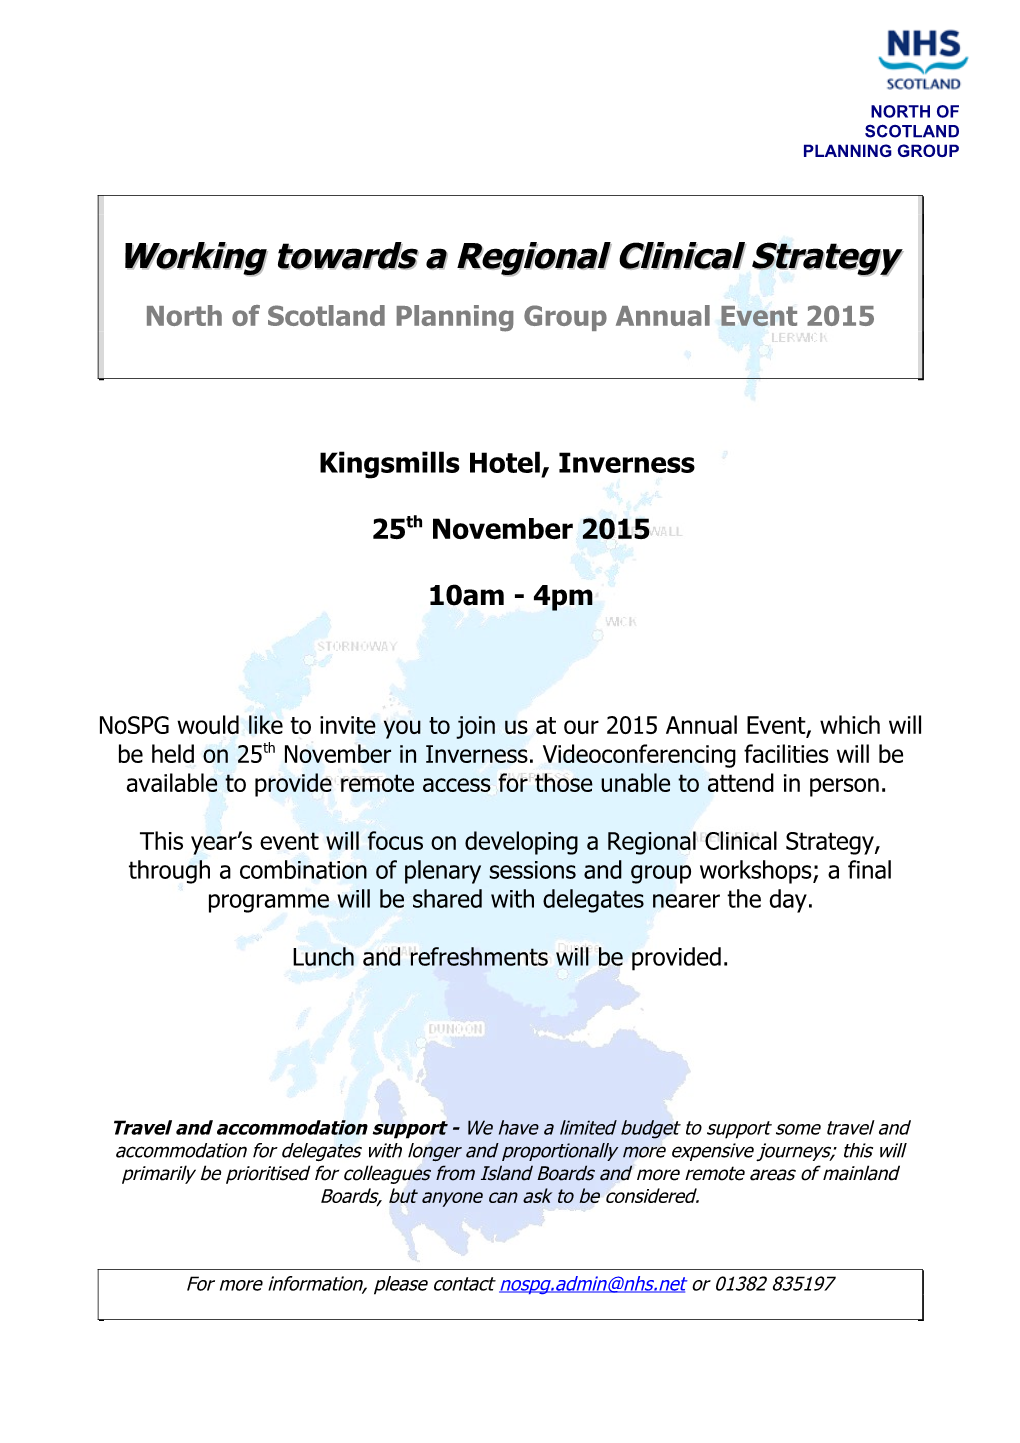 Working Towards a Regional Clinical Strategy